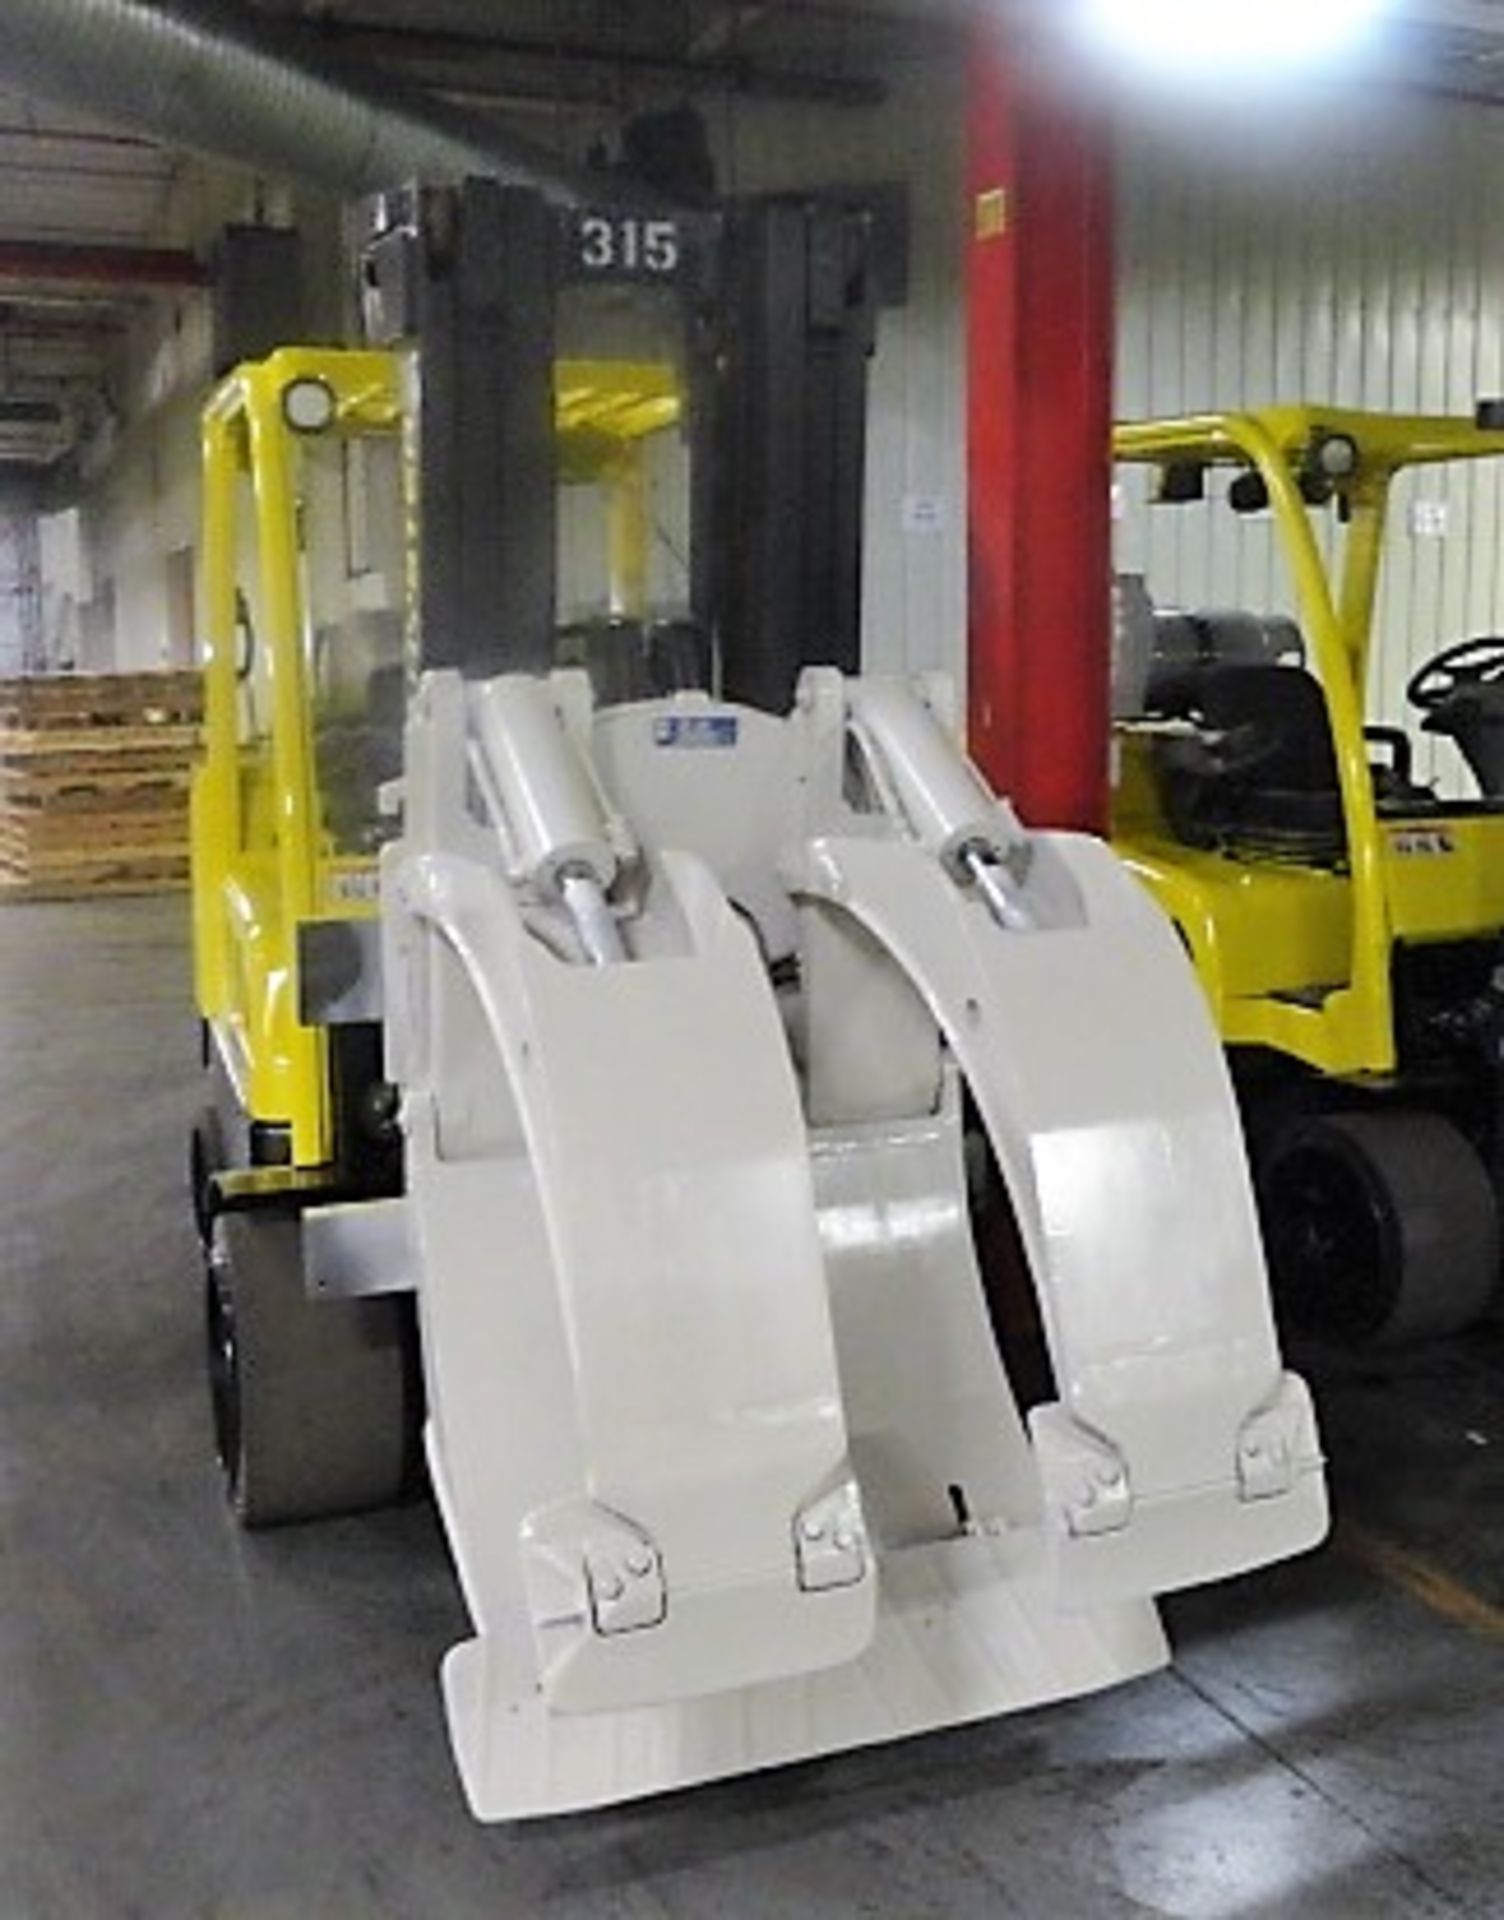 10,000 Pound Hyster Roll Clamp Truck 2012. Model S100FTBCS - Image 2 of 7